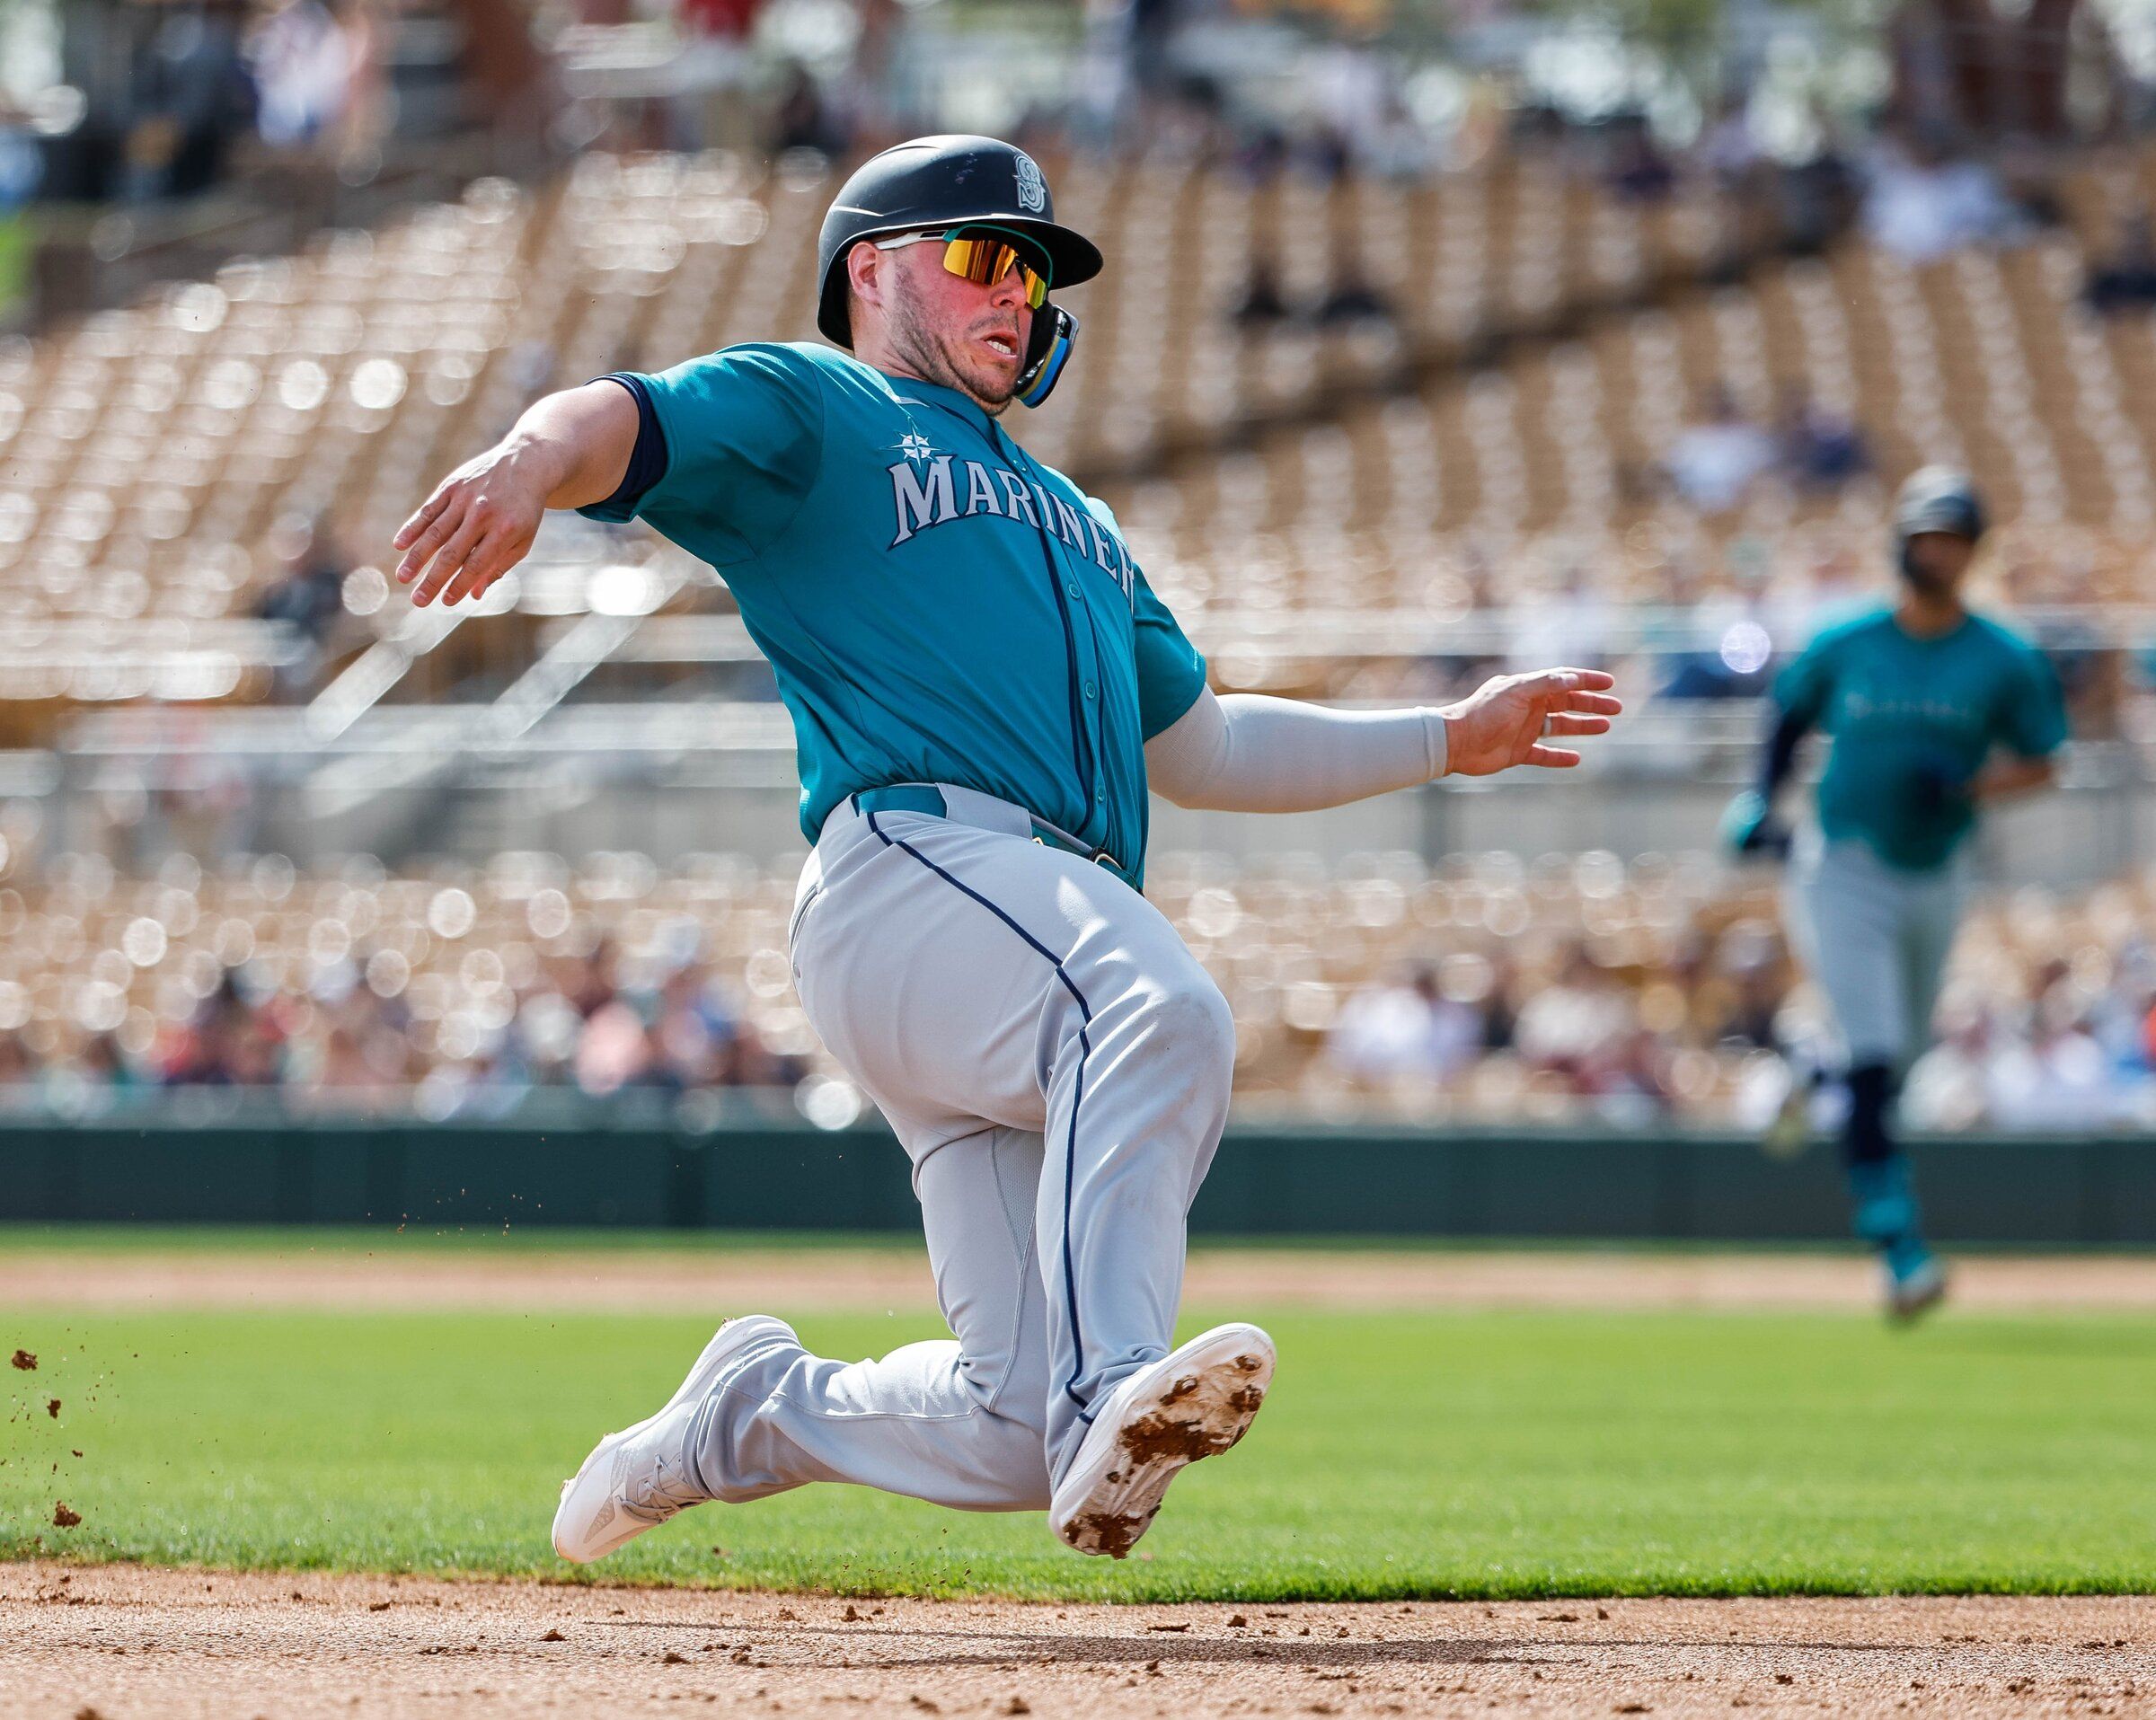 Early observations from Mariners spring training, plus one bold